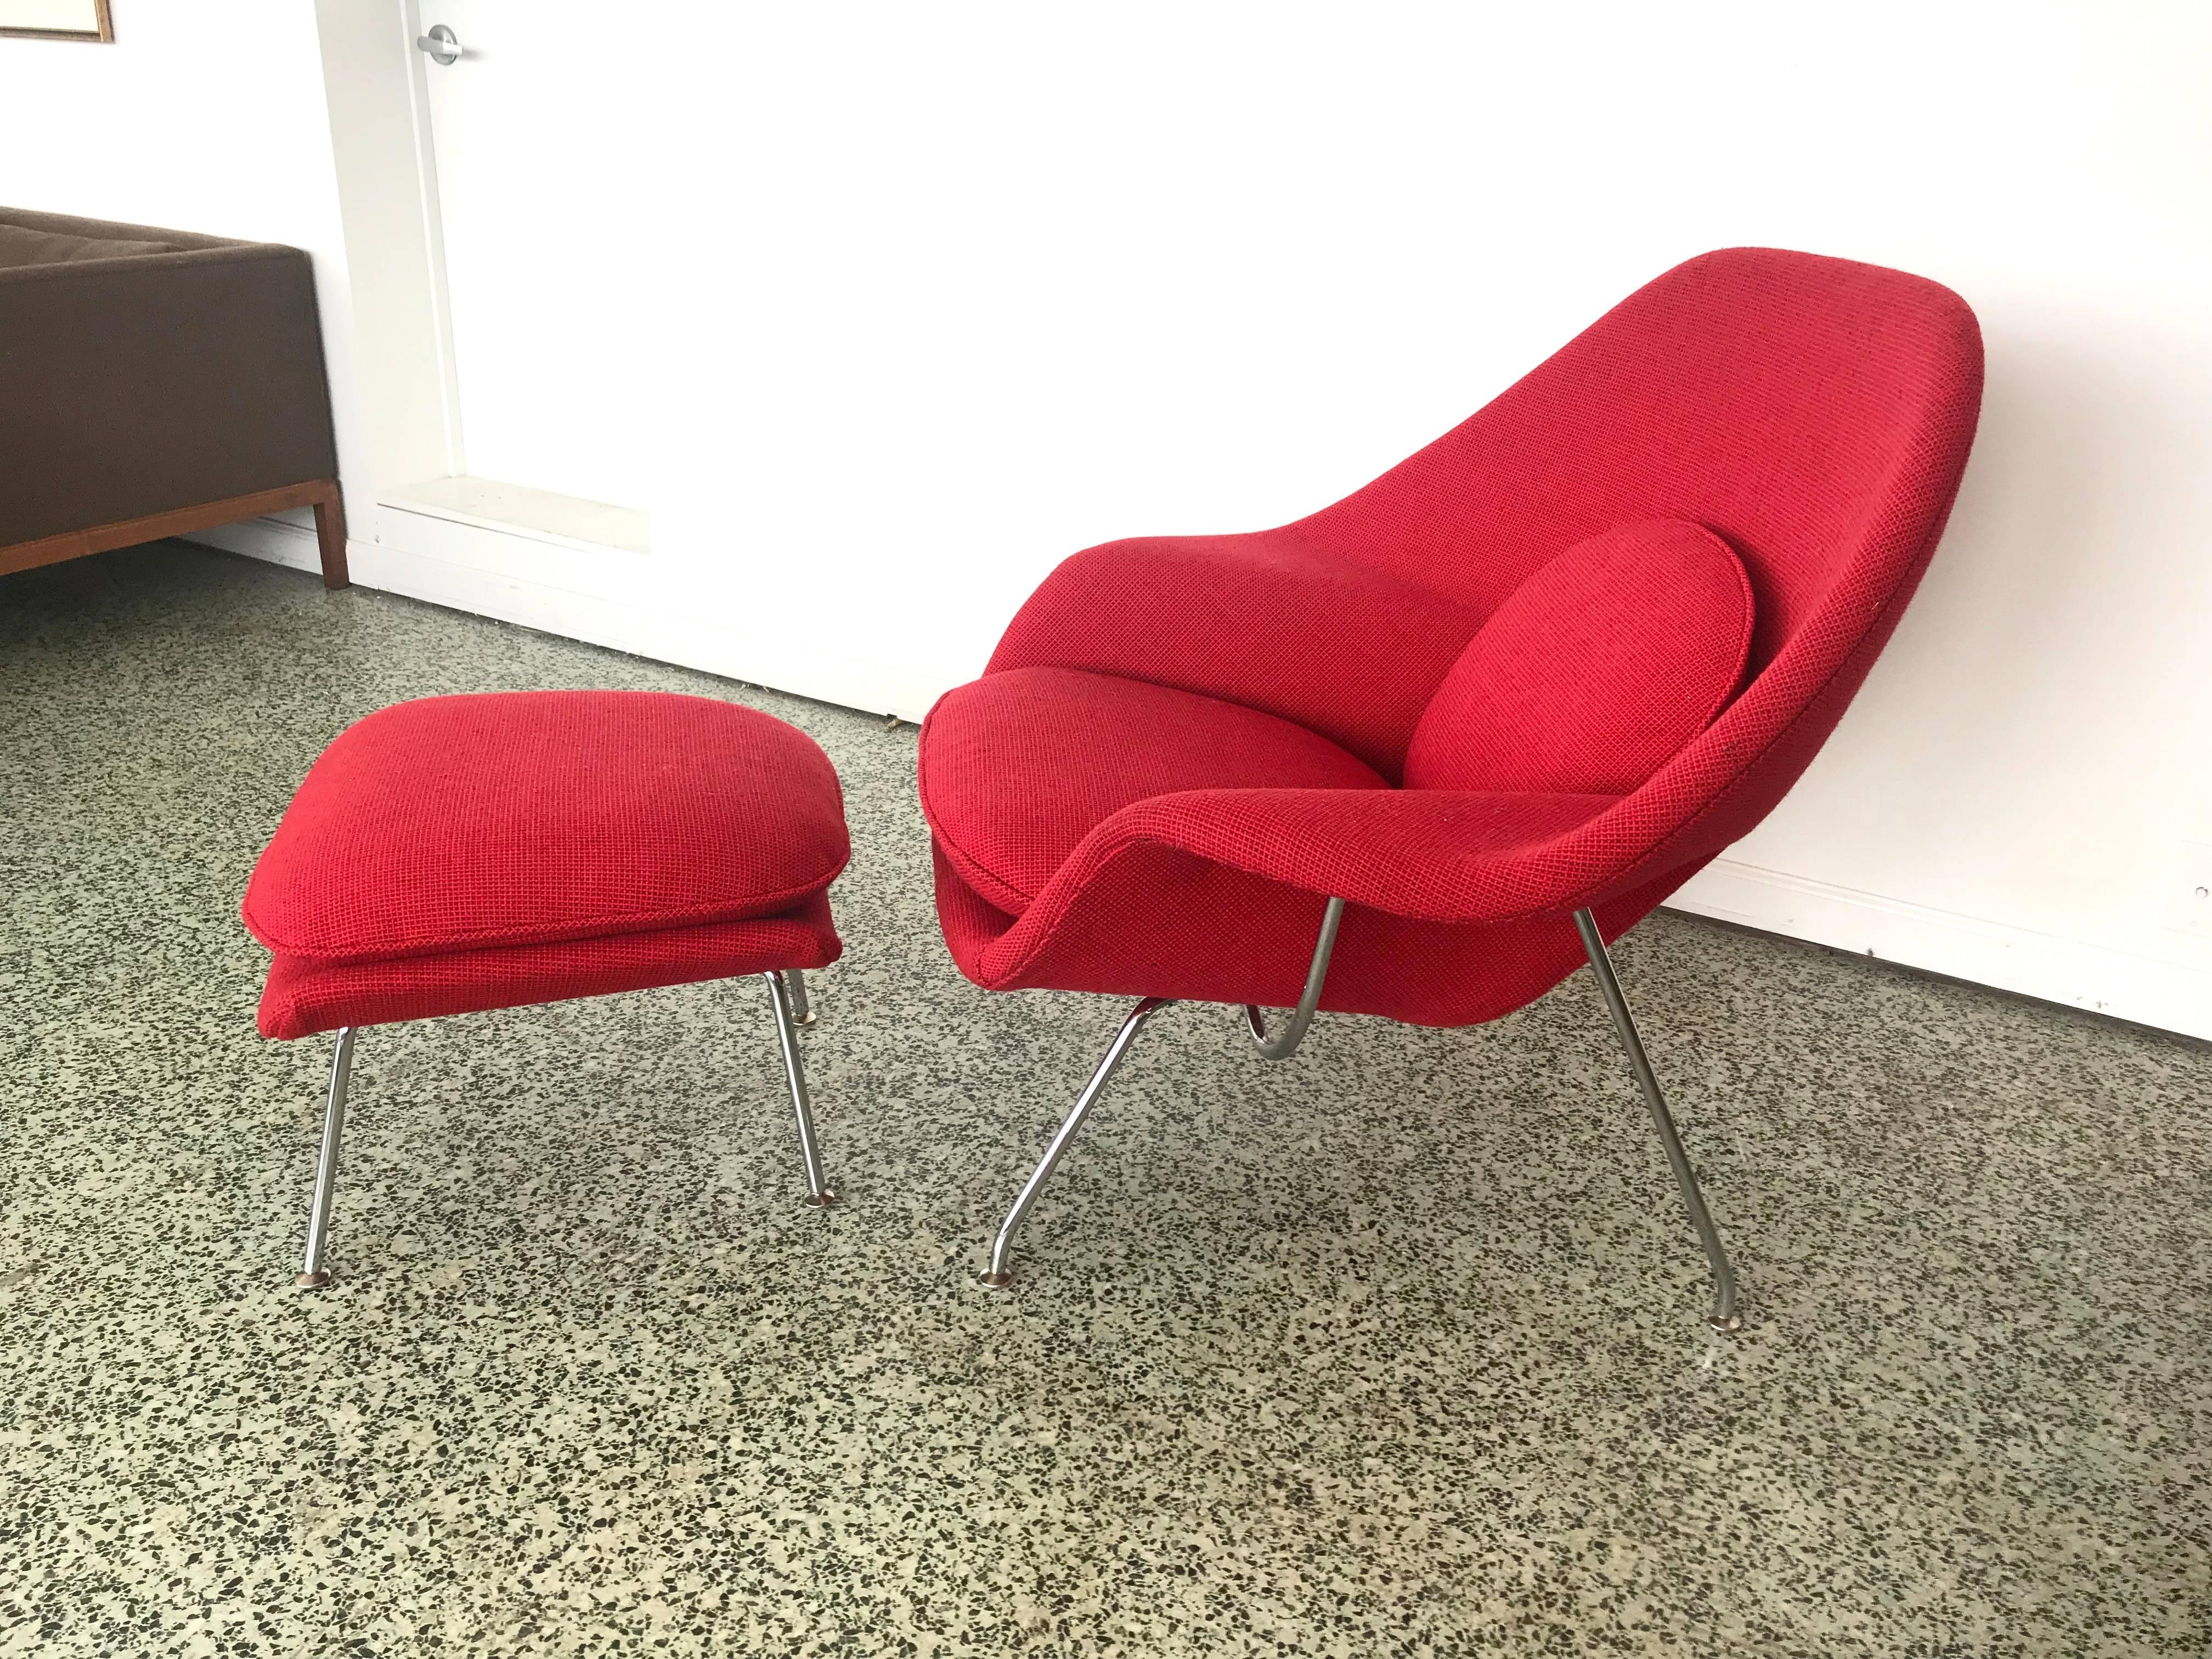 Designer: Eero Saarinen
Manufacturer: Knoll 
Period/style: Mid-Century Modern 
Country: US
Date: 1960s

Recently reupholstered in Knoll fabric.